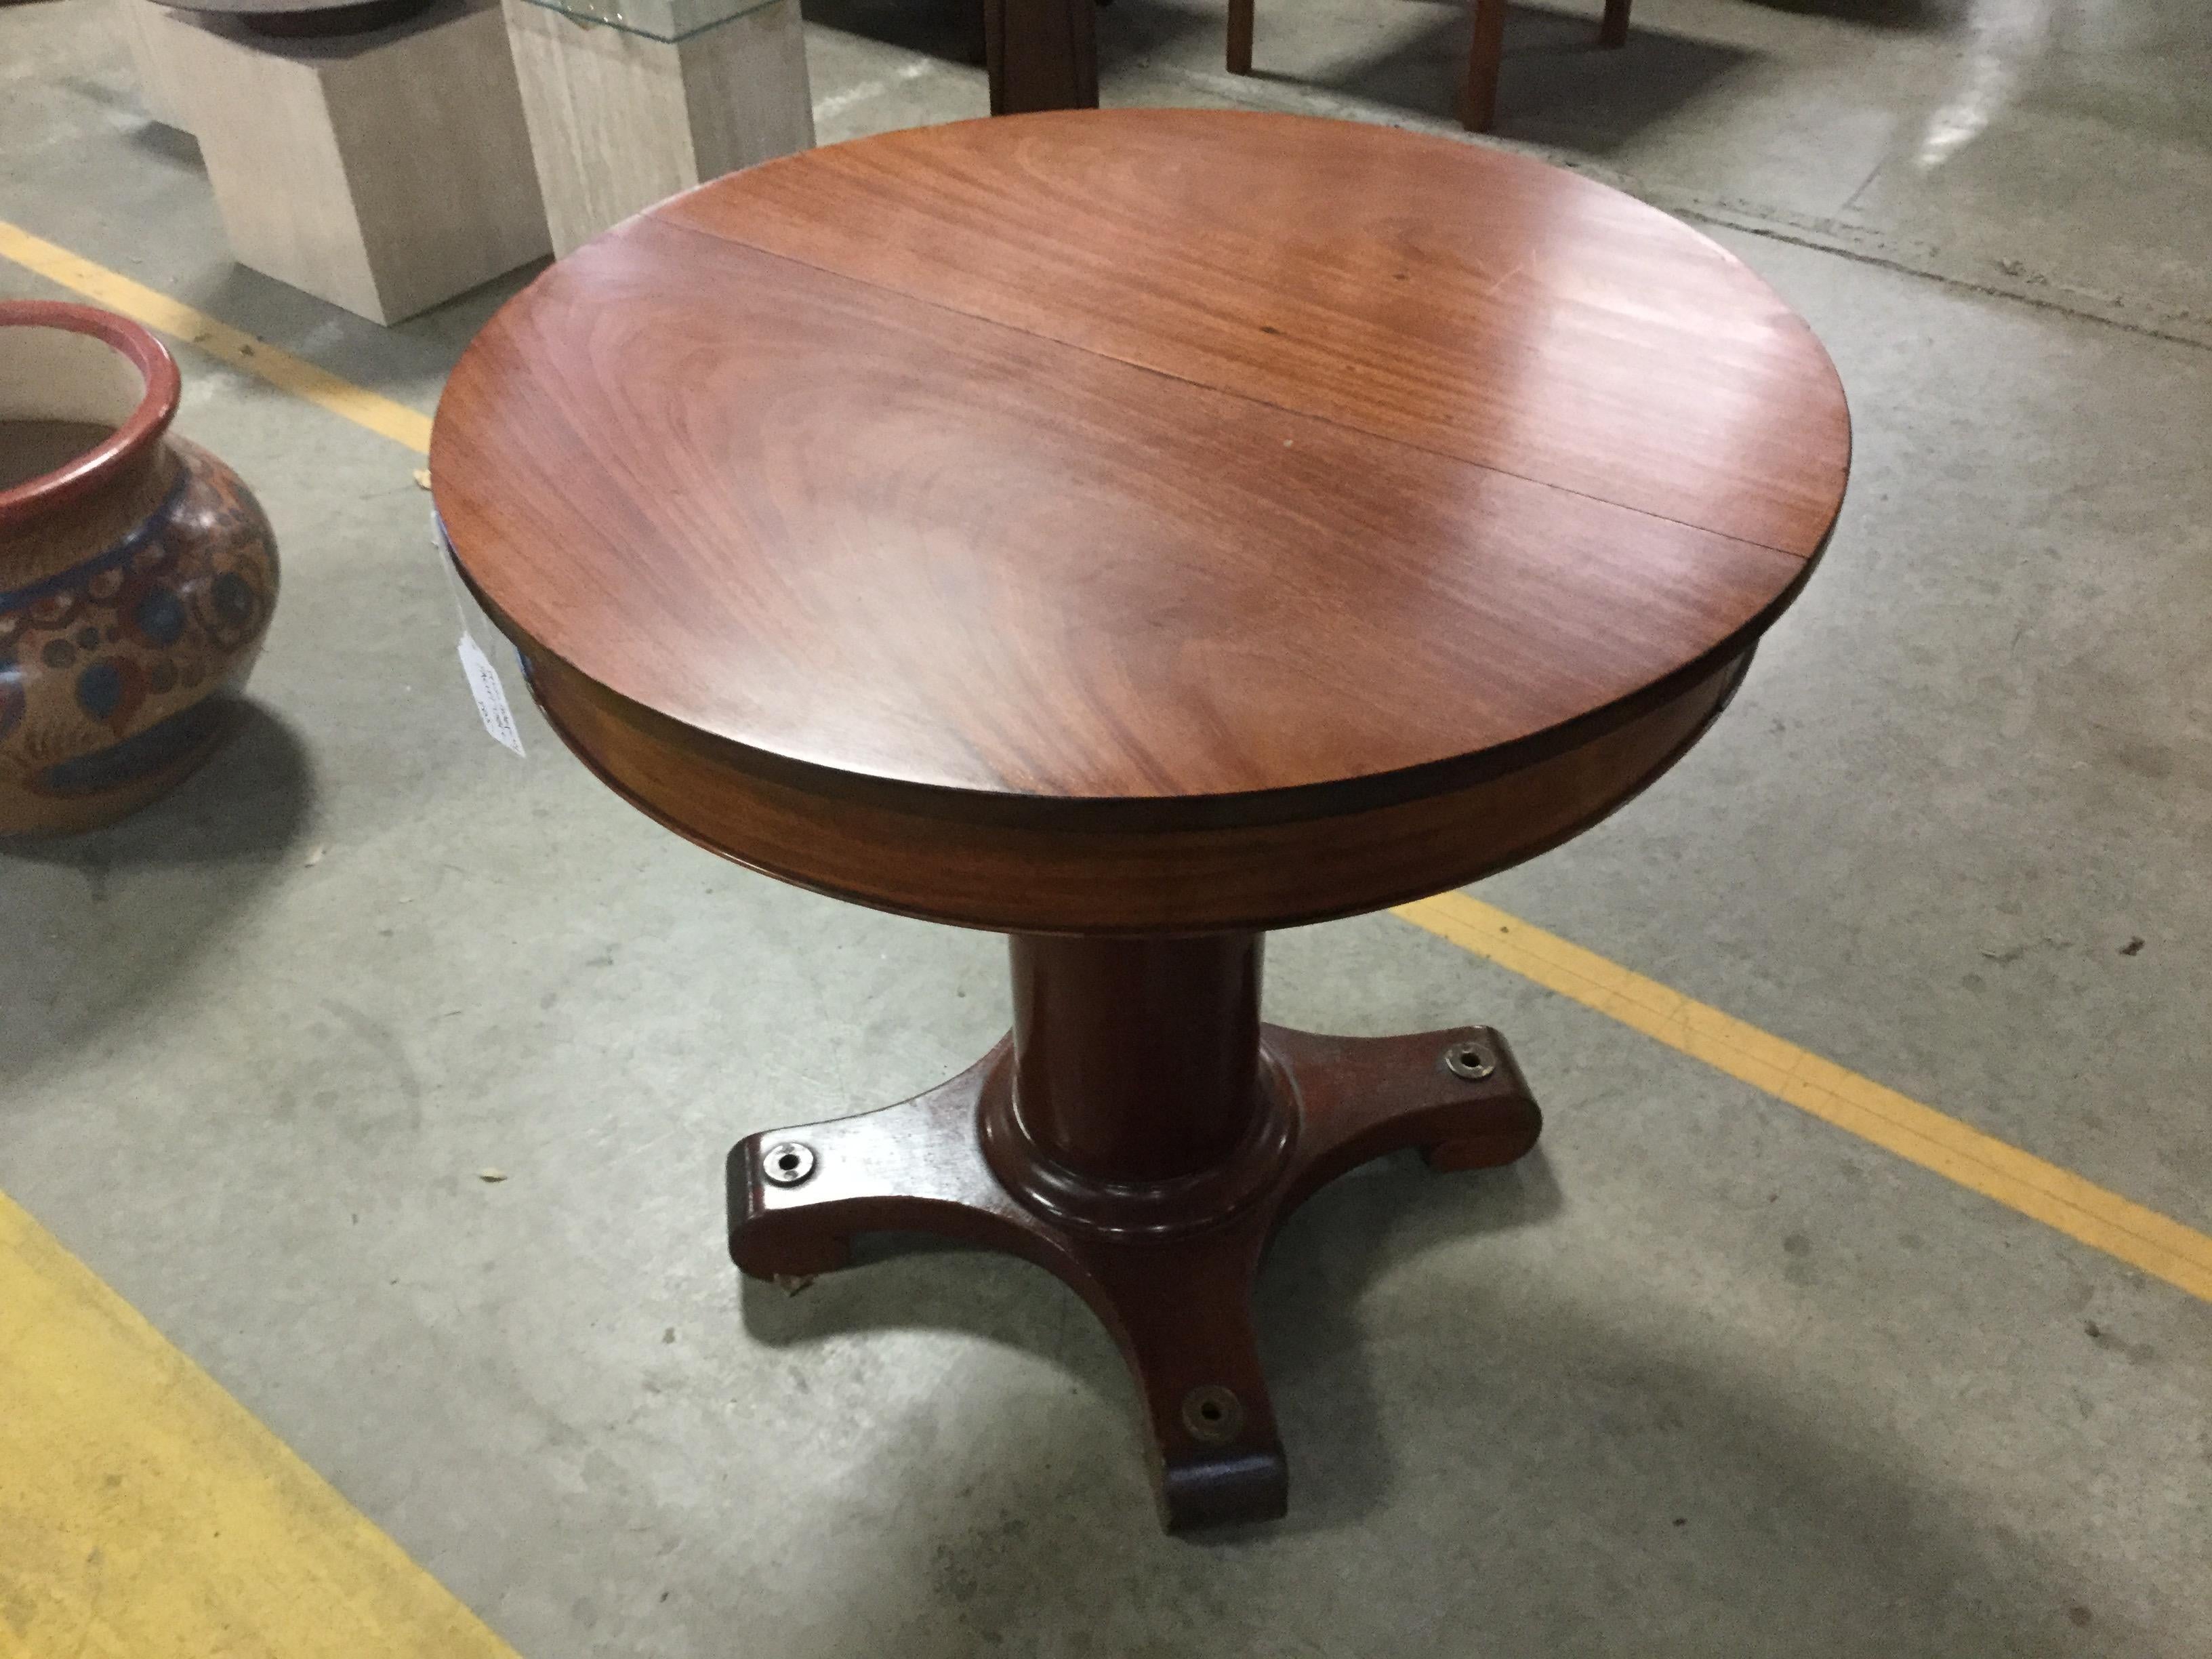 Table came from a large yacht. It has brass fittings on the feet to anchor it to the floor. Varnished cherrywood. Look great on your boat or home.